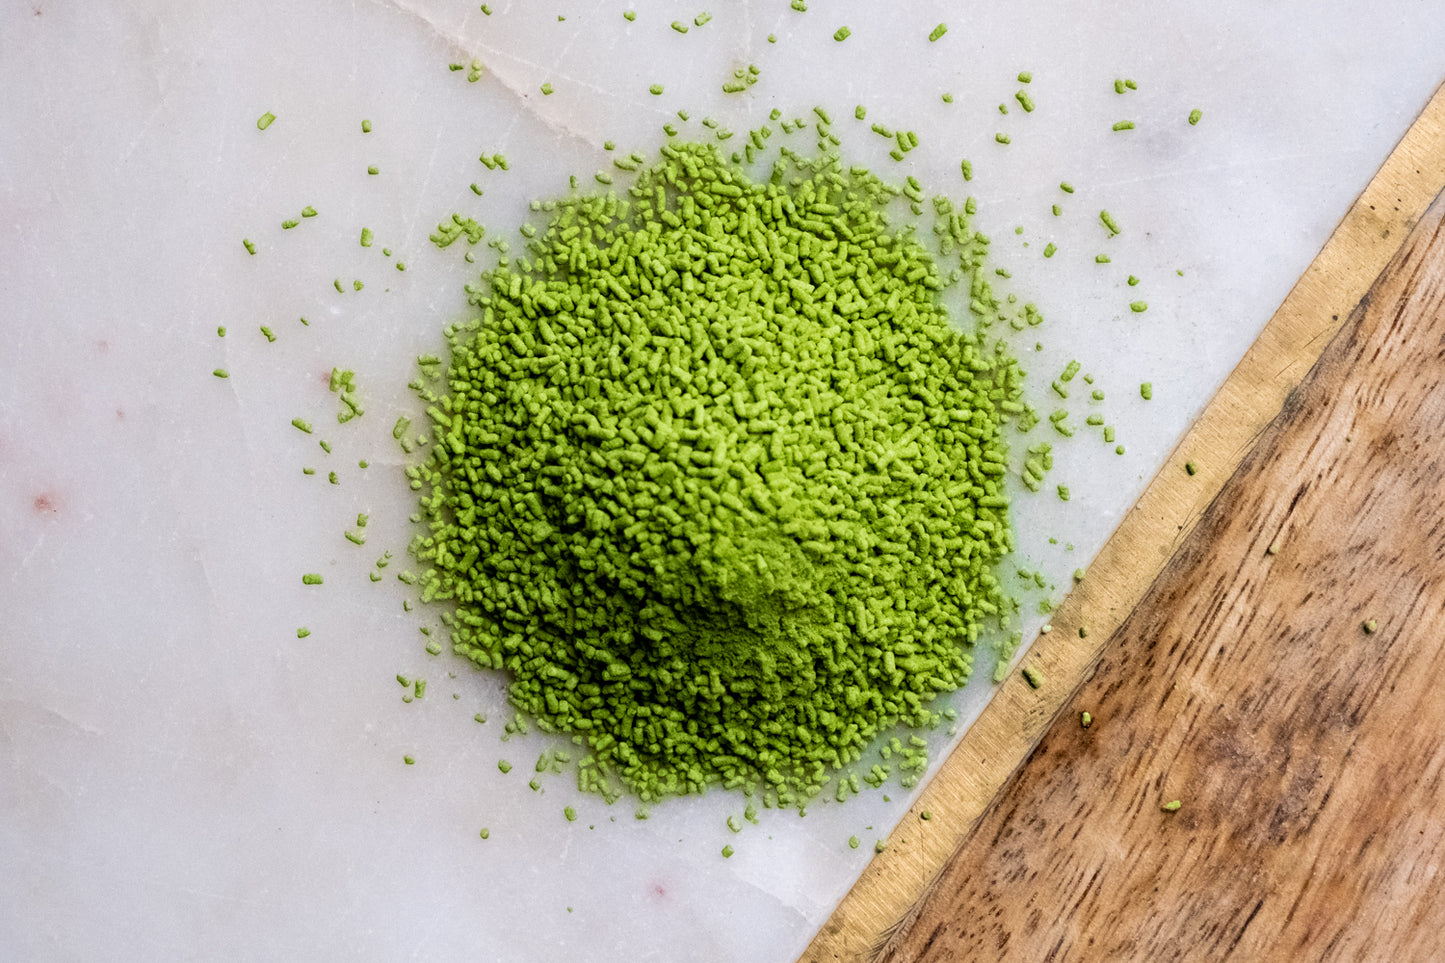 vibrant green matcha collagen peptides, no sweetner needed, lightly sweetened, delicious aroma and light taste, for drinking by itself in a tea ceremony or in matcha latte, matcha lemonade, mixed drinks and foods